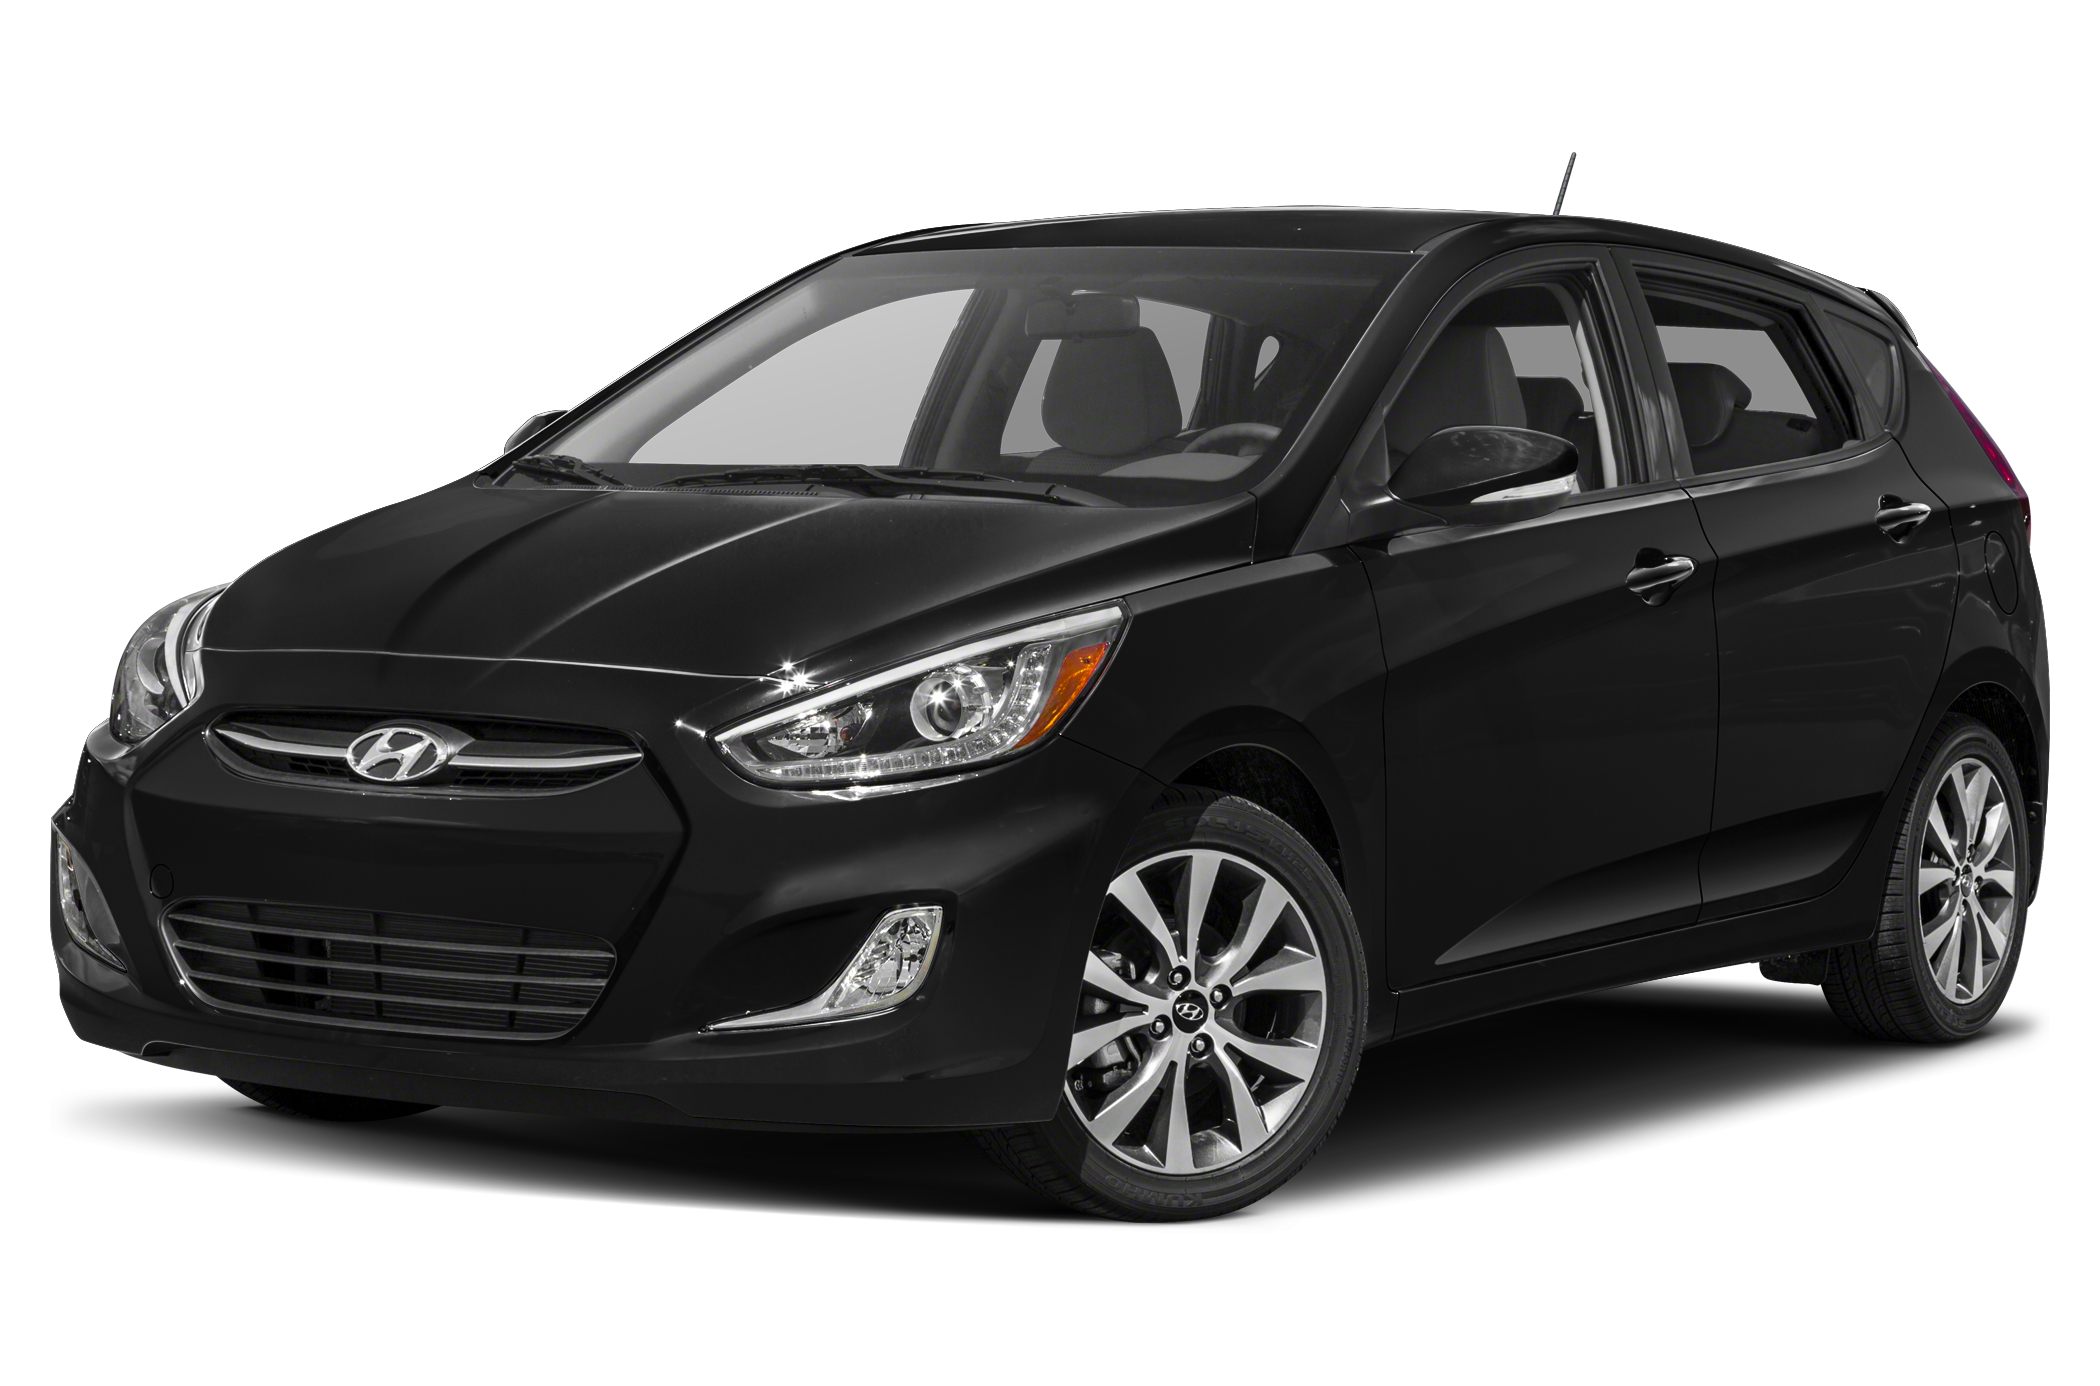 2015 Hyundai Accent oem parts and accessories on sale